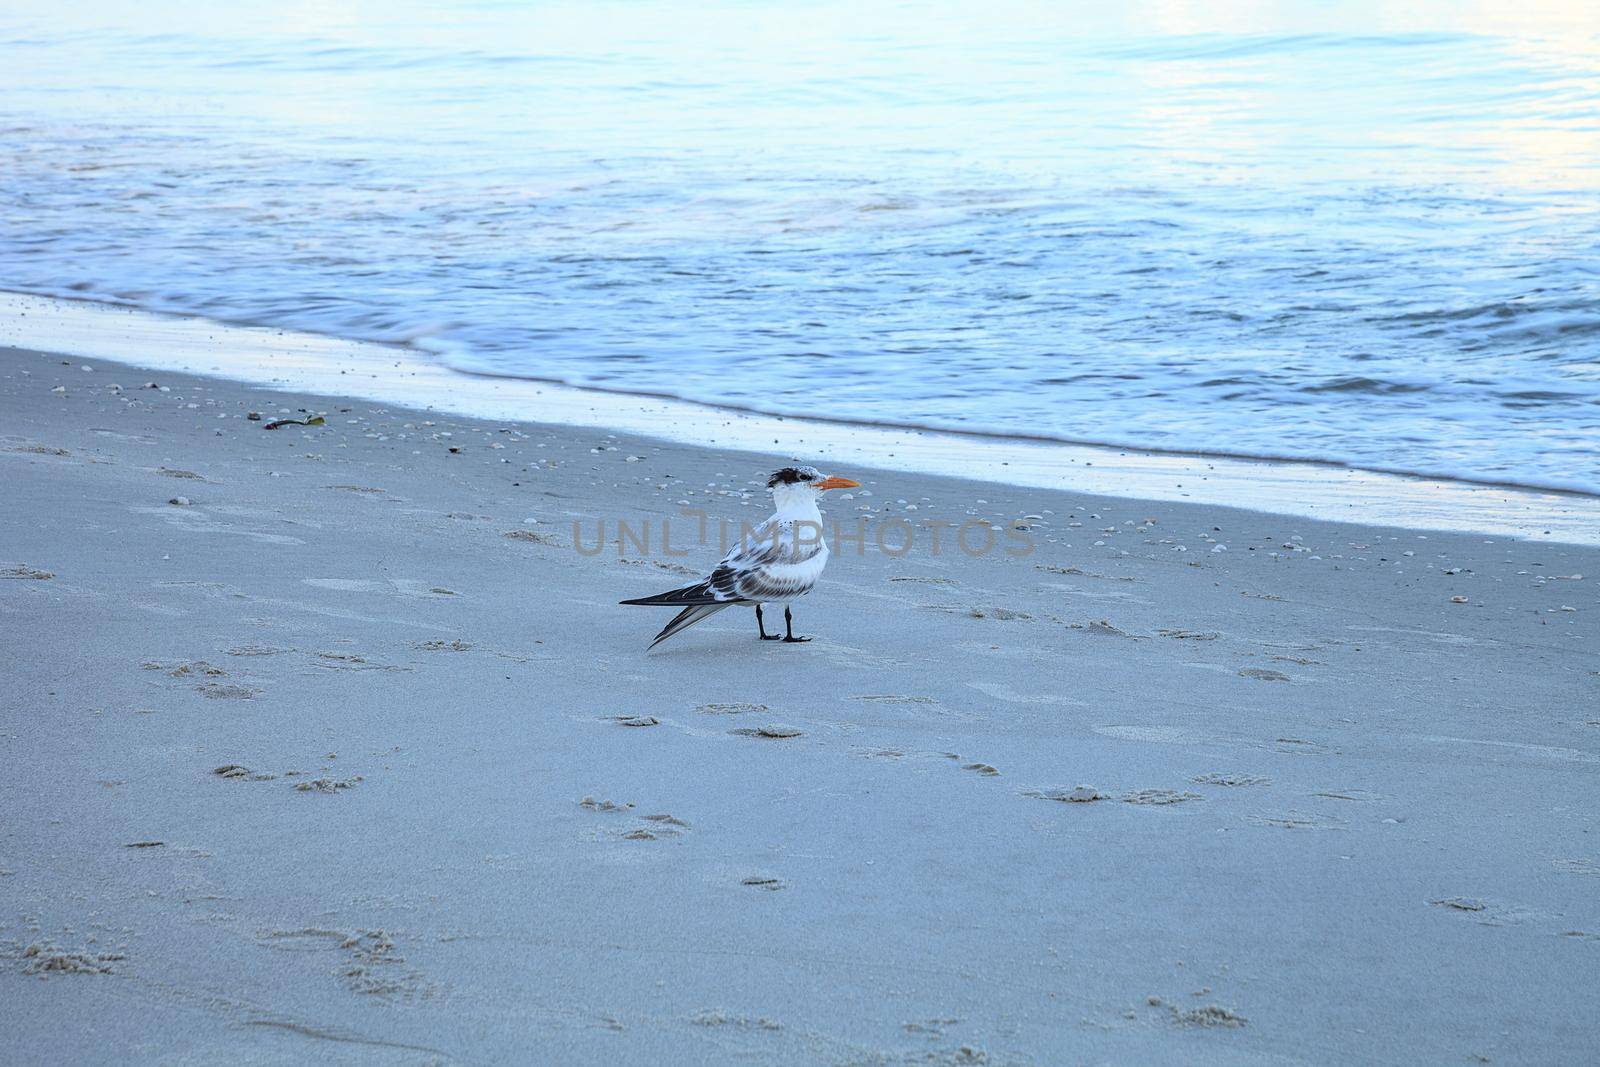 Royal tern stands on the white sand beach and overlooks the ocean in Naples, Florida.